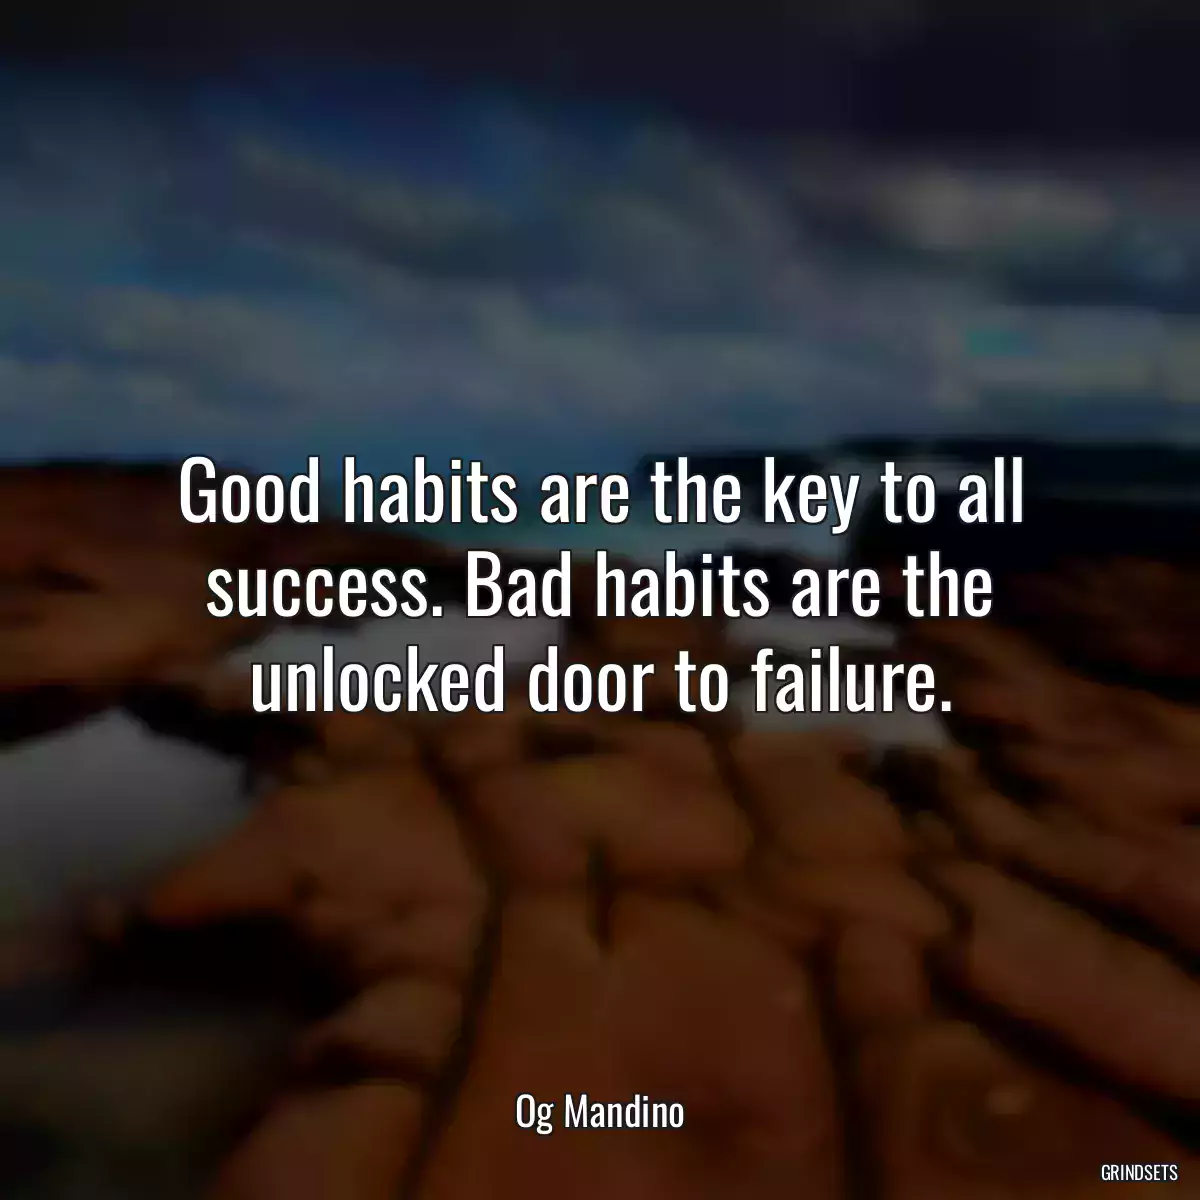 Good habits are the key to all success. Bad habits are the unlocked door to failure.